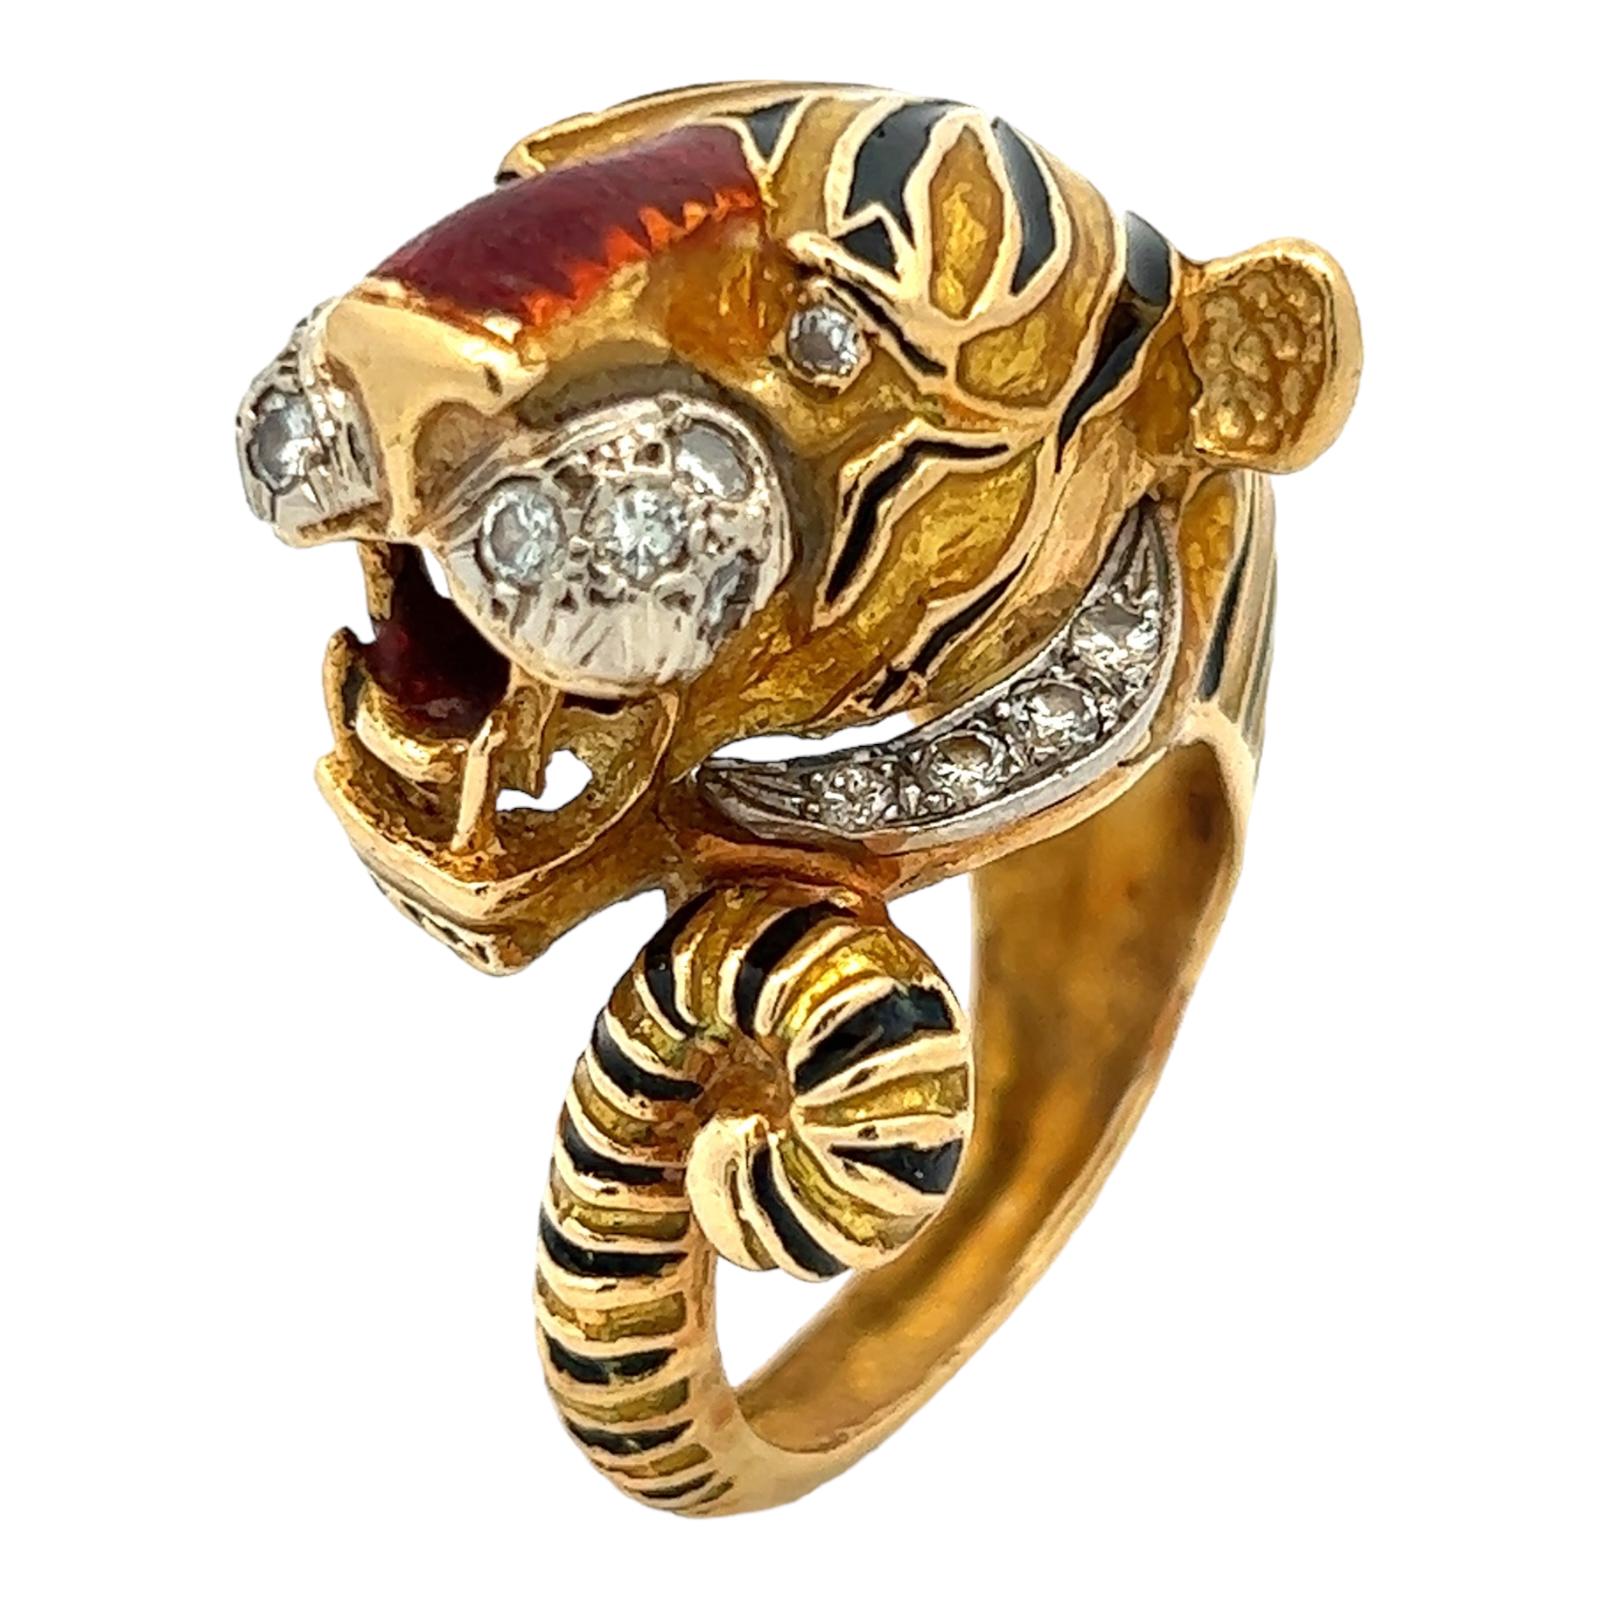 Diamond and enamel tiger cocktail ring crafted in 18 karat yellow gold. The tiger head ring is set with 16 round brilliant cut diamond accents weighing approximately .30 CTW (graded H-I/SI). Black and orange enamel adorn the entire ring which is